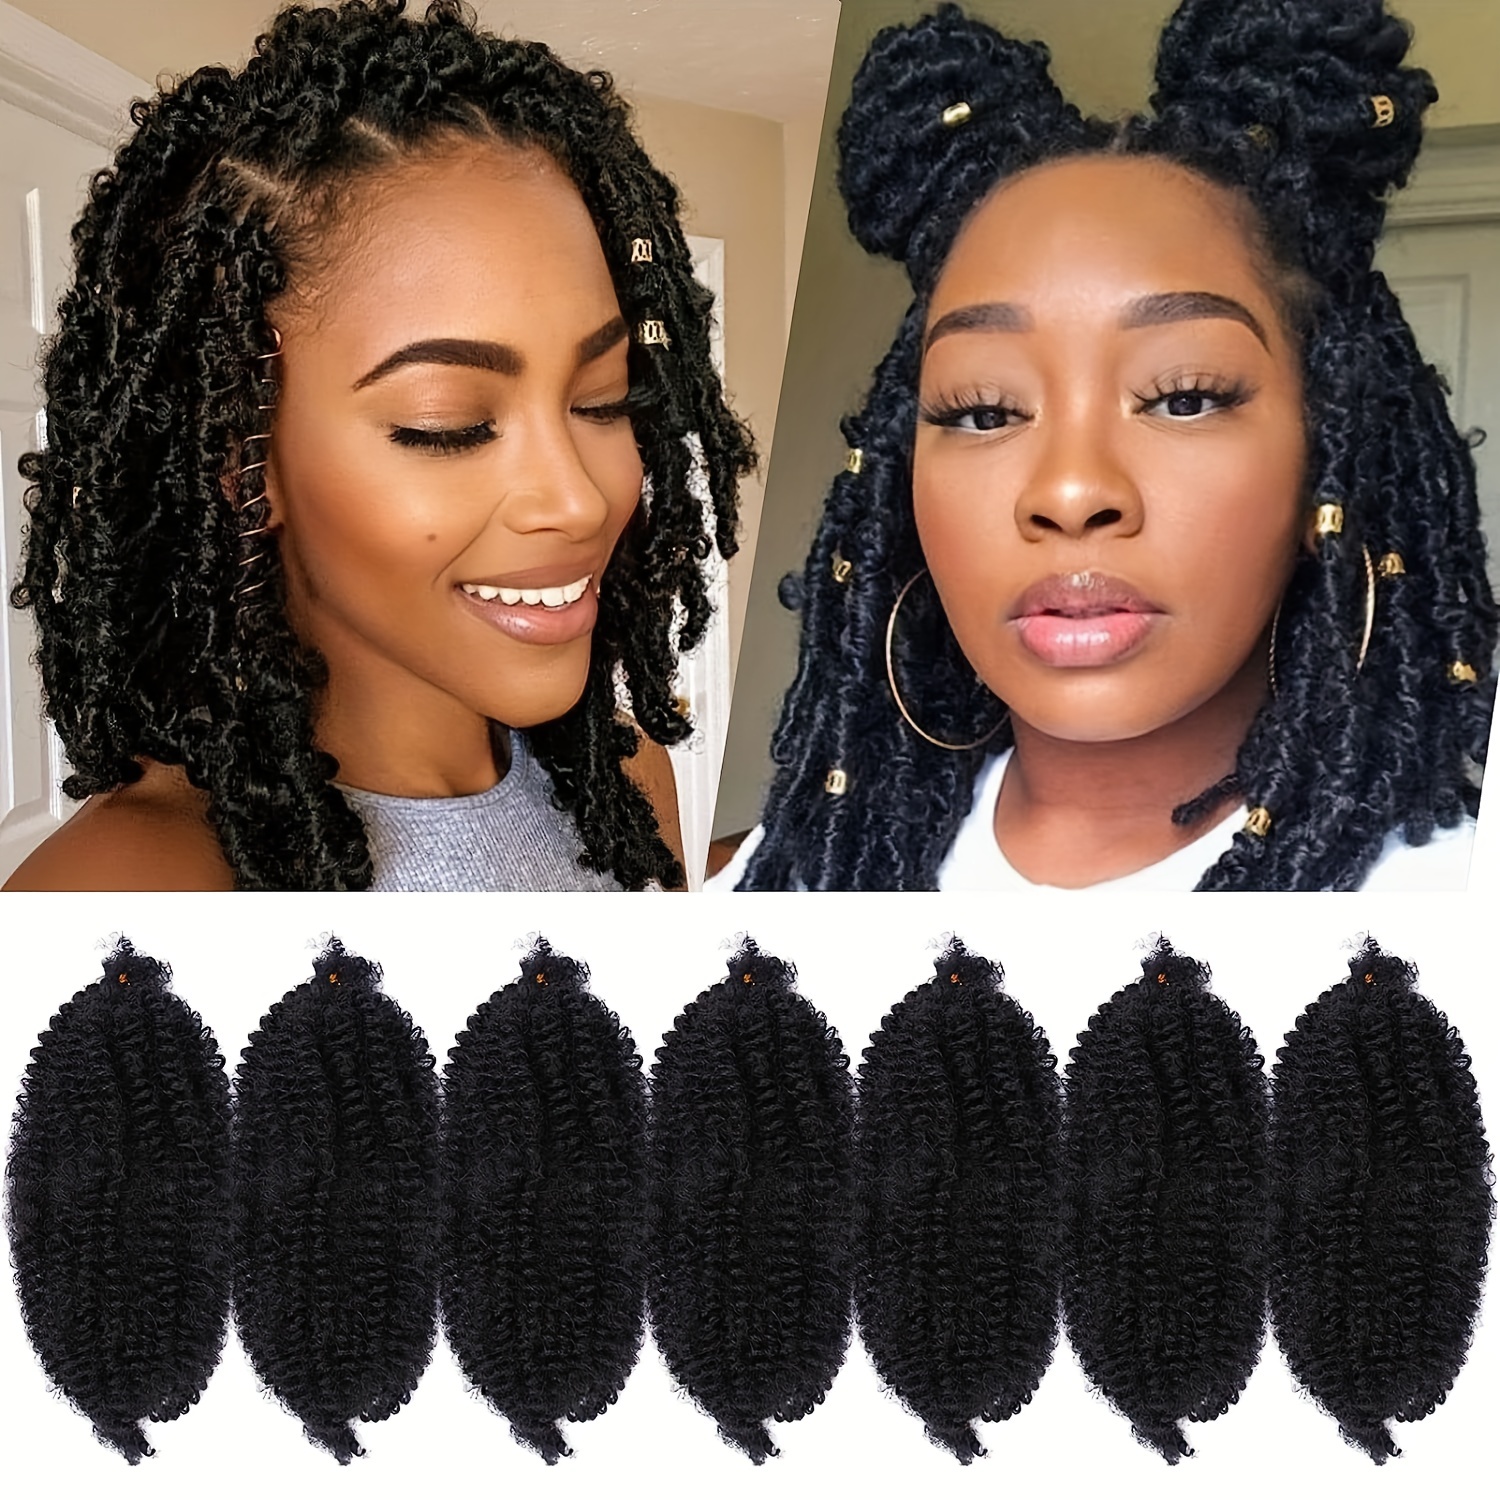  FANCEE Faux Locs Crochet Hair 8 Inches Short Curly Dreadlocks  Extensions for Black Women Pre Looped Soft Nu Locs Ombre Brown Wavy Crochet  Dreads Braiding in Hair Extensions(6 Packs 120